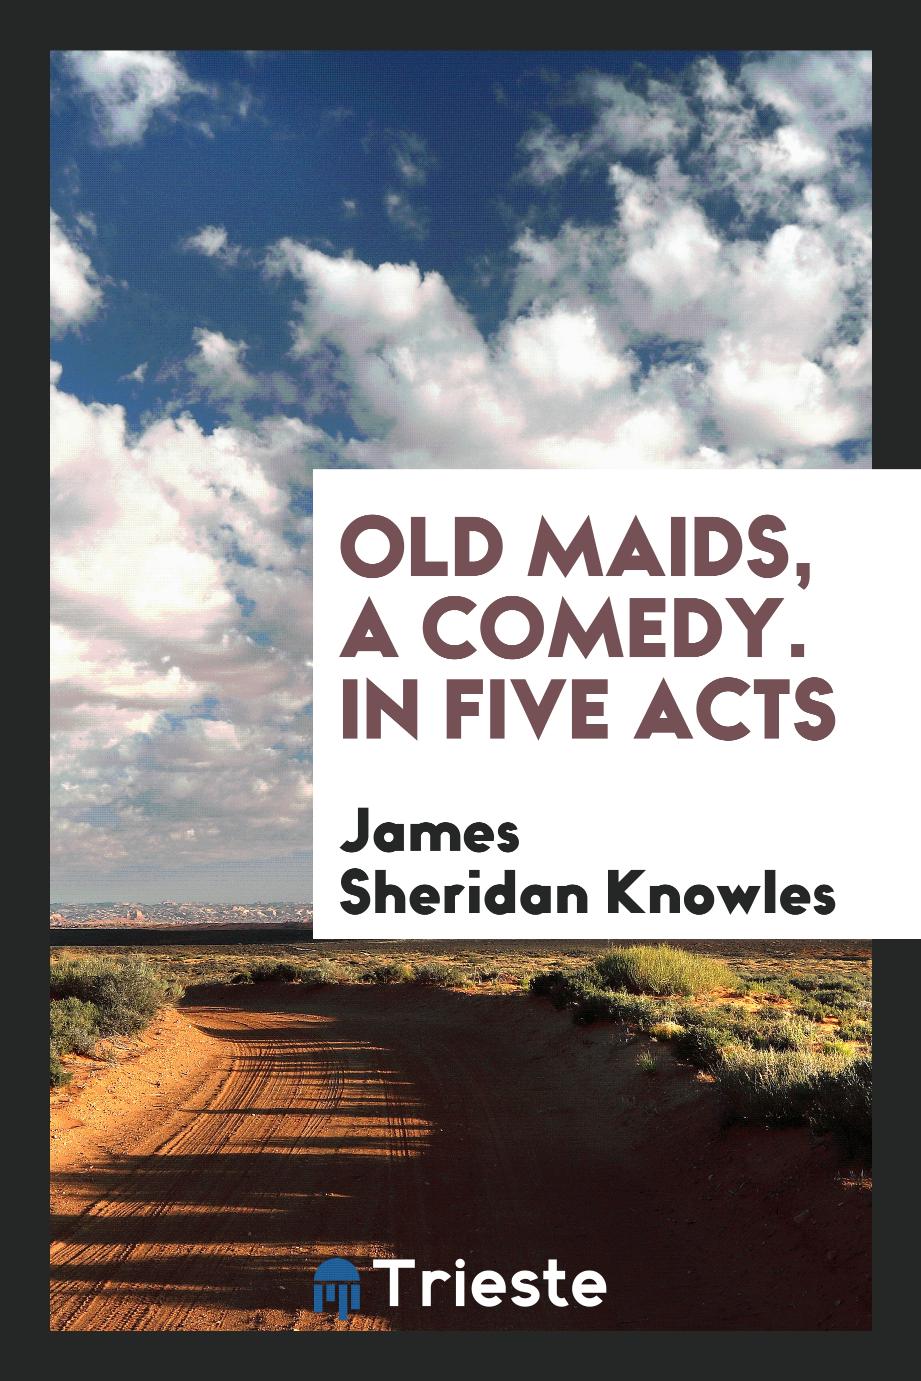 Old Maids, a Comedy. In Five Acts